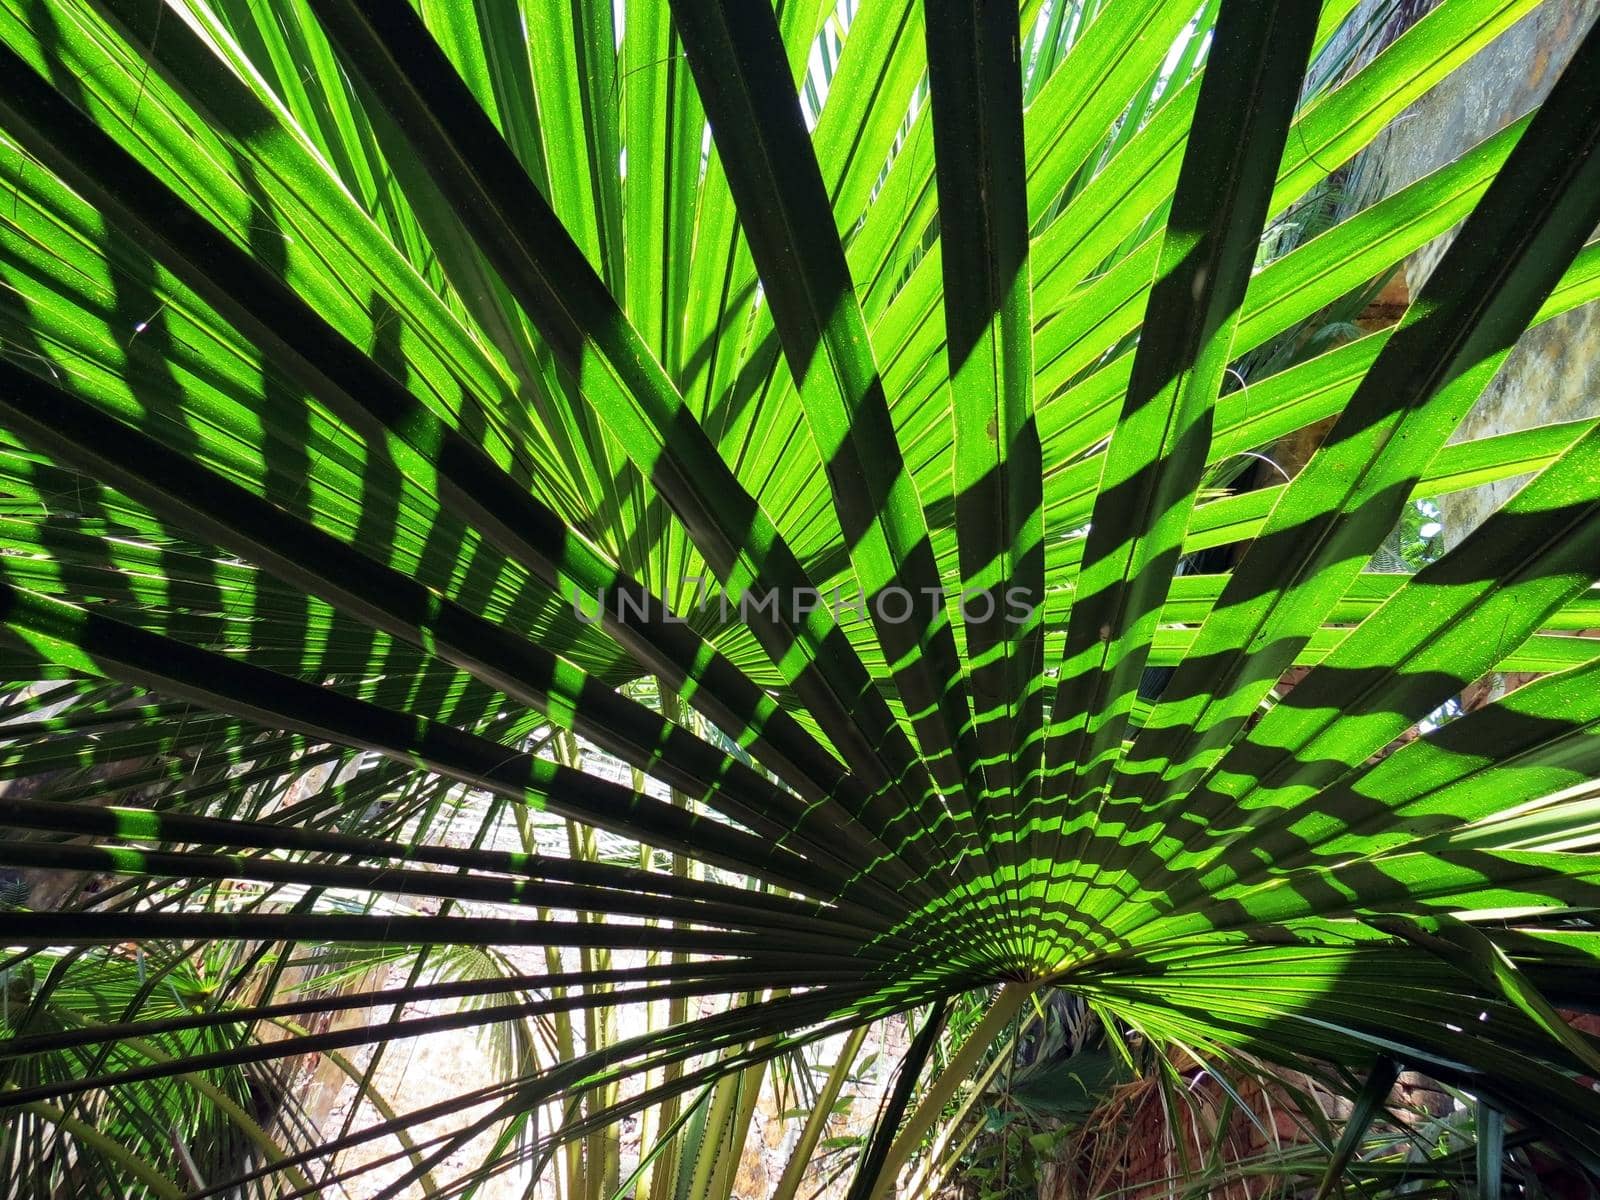 Natural pattern of light shadow on tropical leaf.